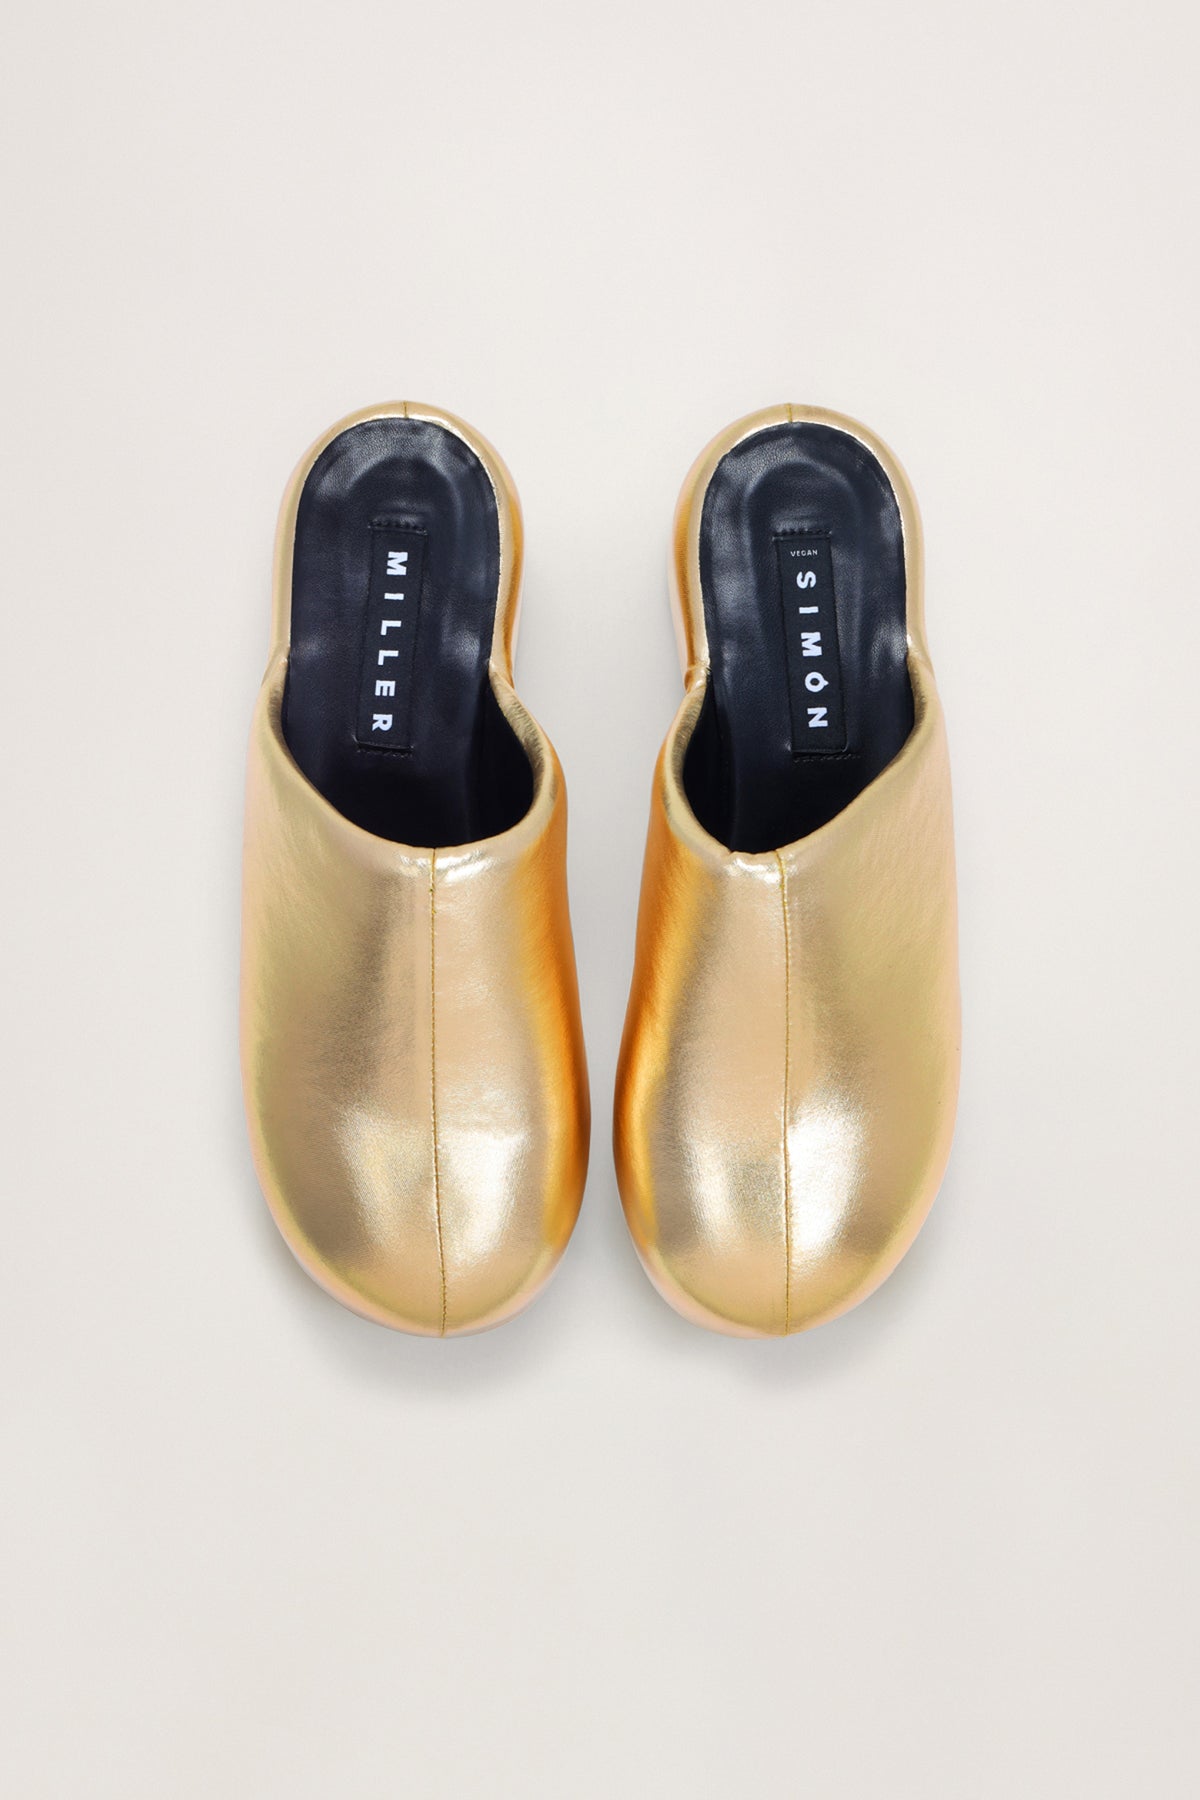 Platform Bubble Clog in Star Gold